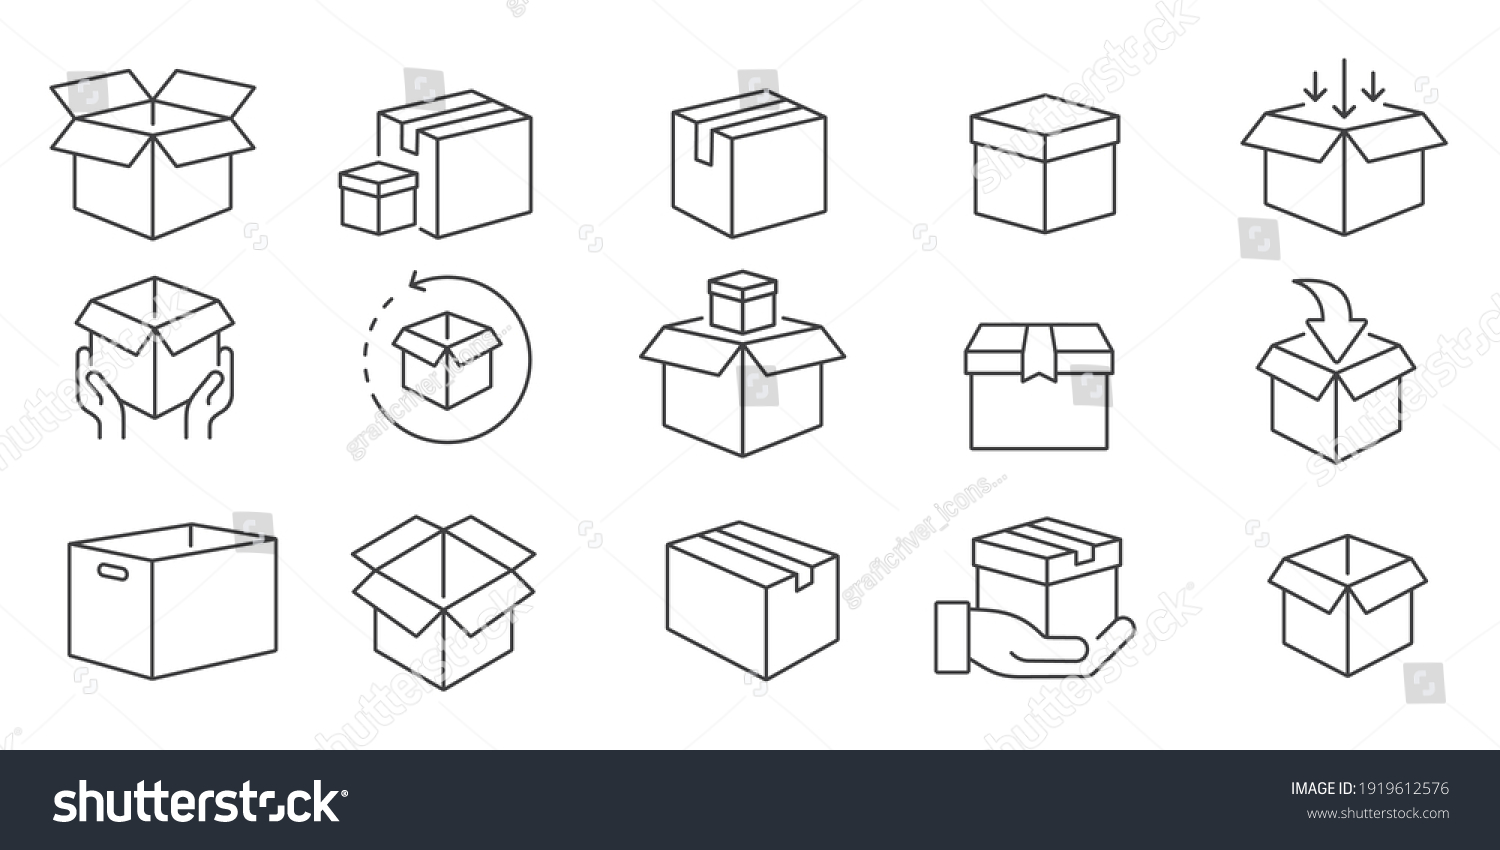 Box icon set in line style, delivery box, Package, export boxes, cargo box, return parcel, gift box, open package, Shipment of goods, vector illustration #1919612576